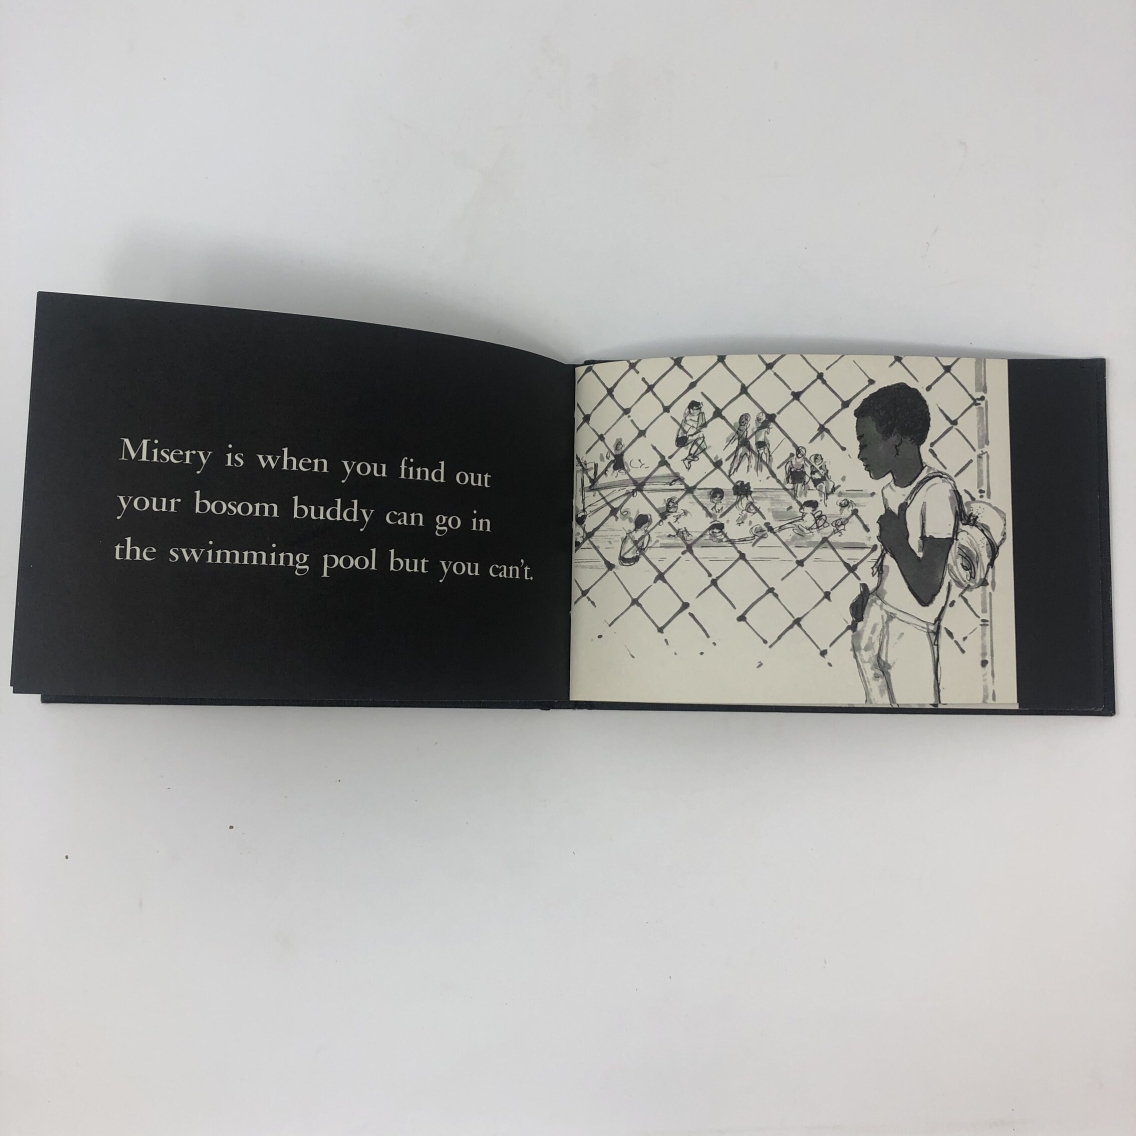 Photograph of a page in the children's book Black Misery by Langston Hughes. The text reads, "Misery is when you find out your bosom buddy can go in the swimming pool but you can't." The illustration is of a Black child looking through a fence at other kids swimming in a pool.